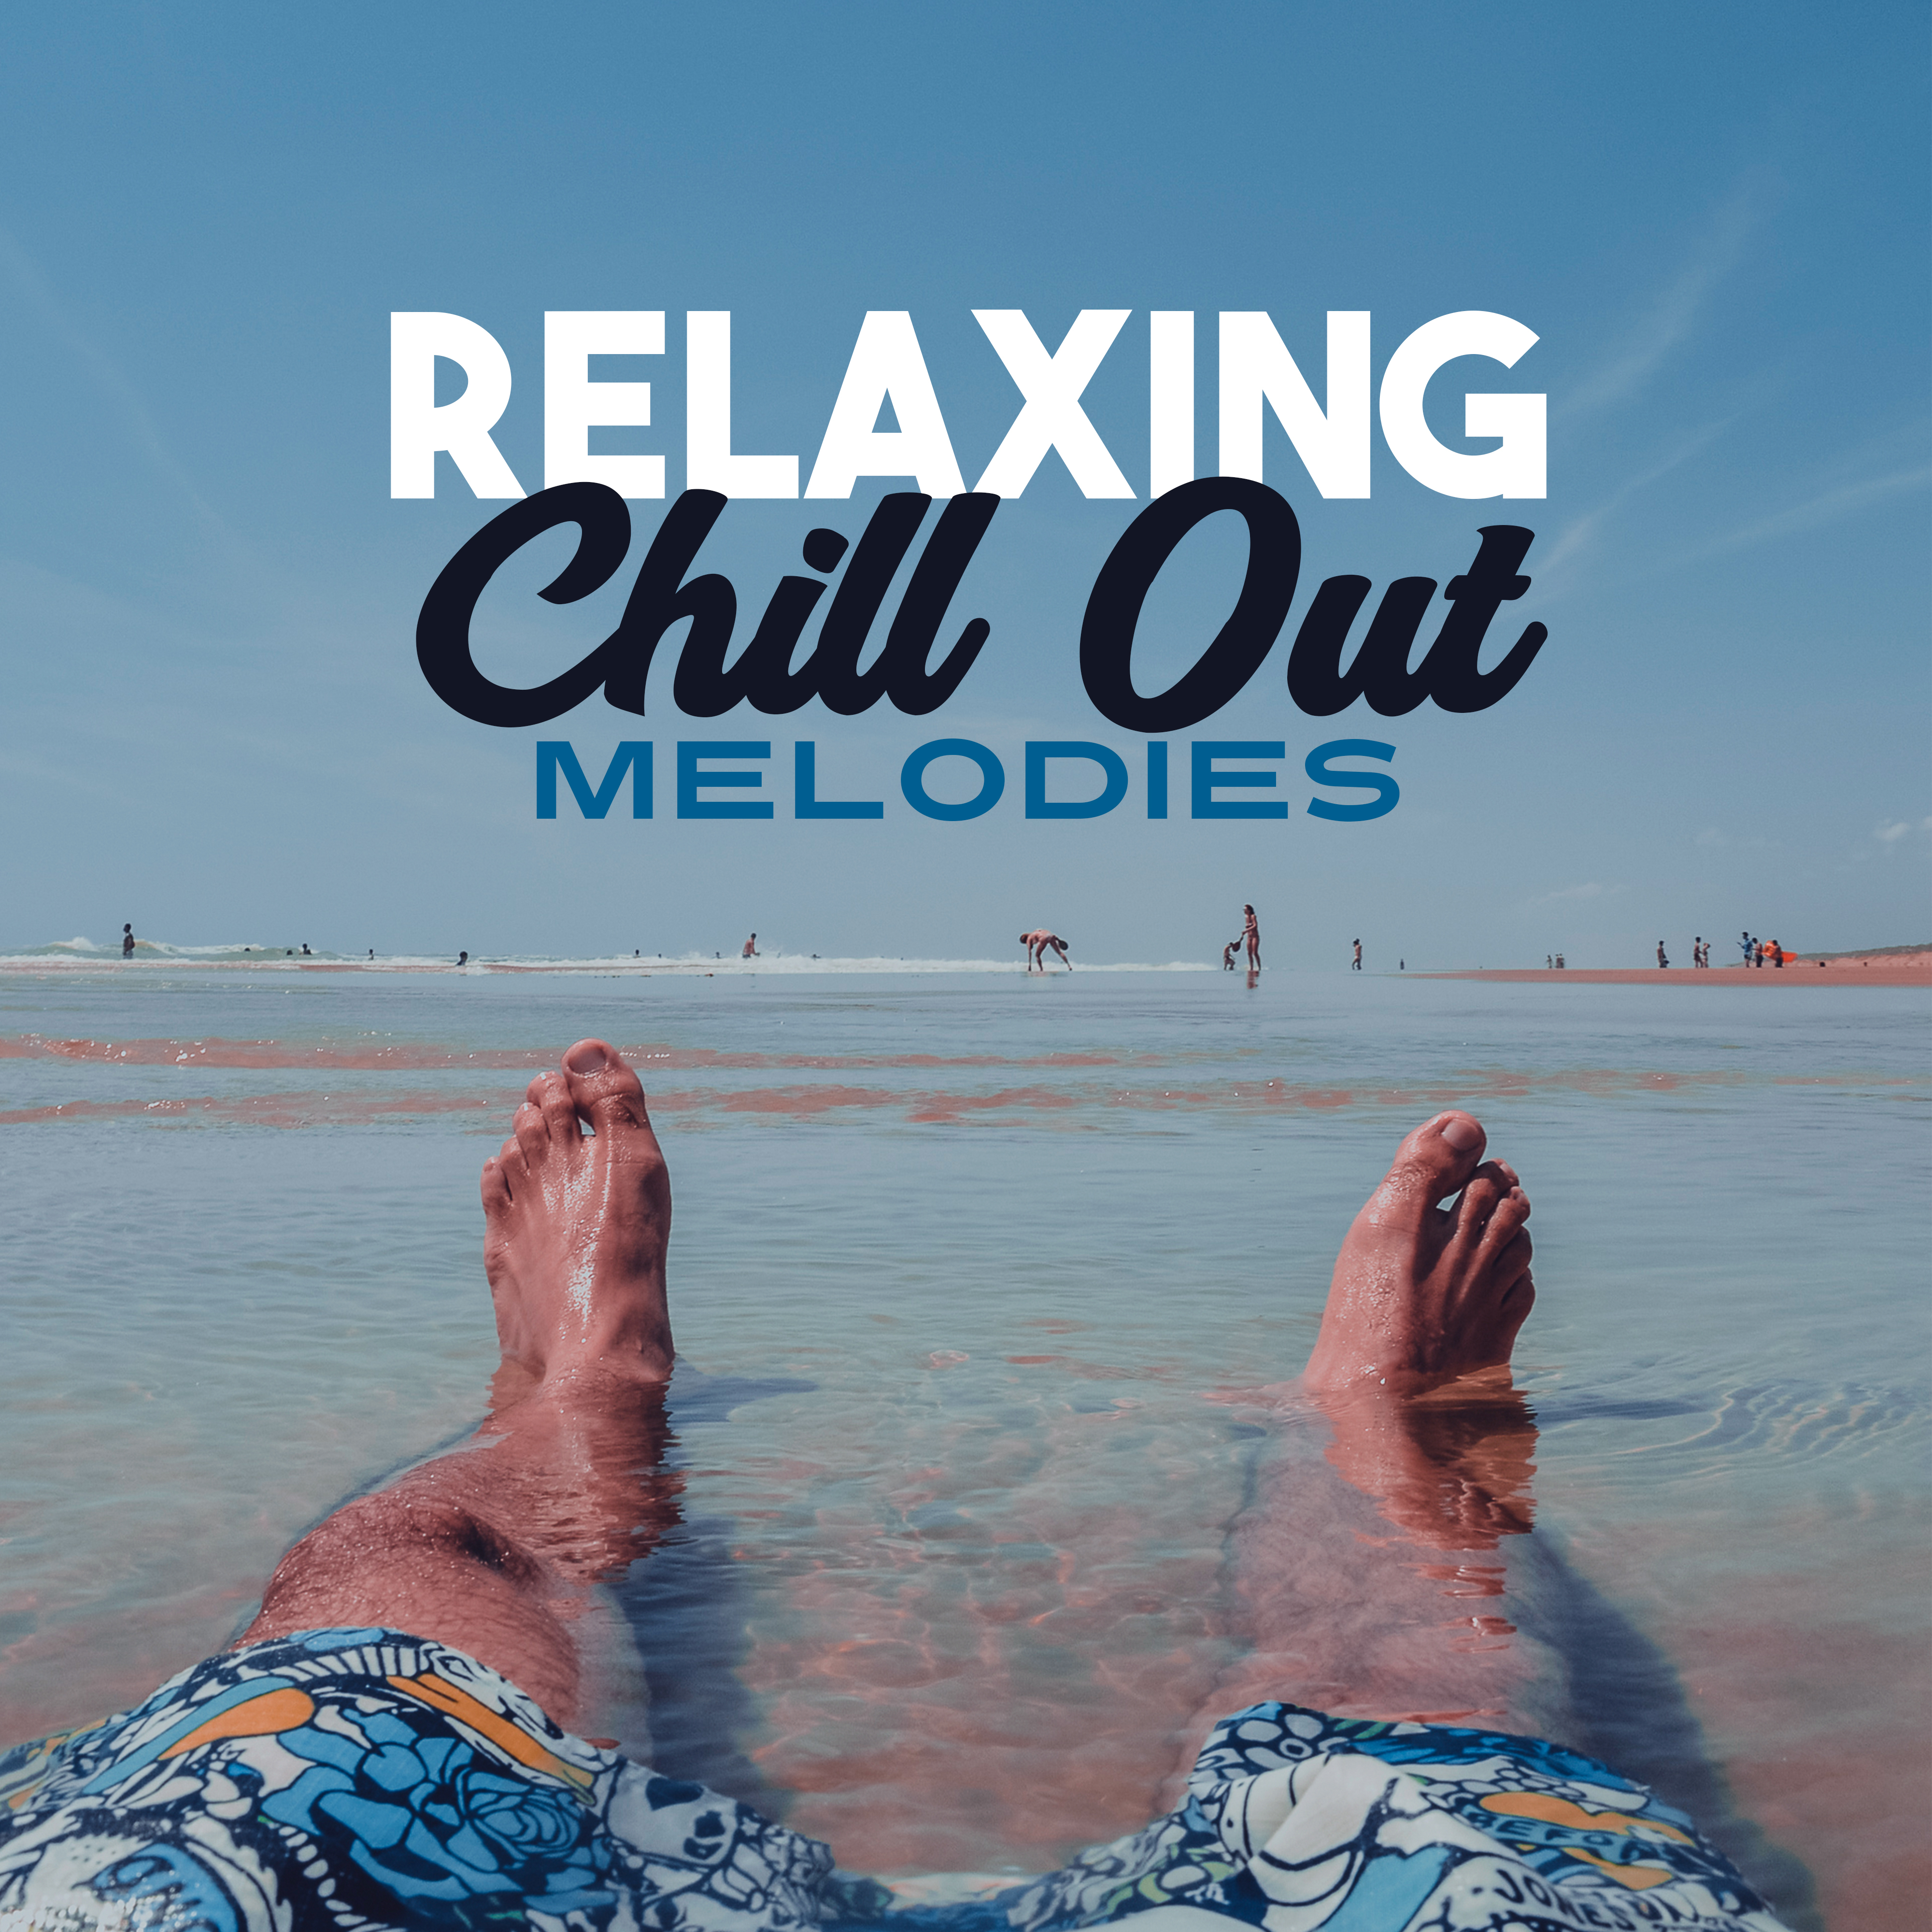 Relaxing Chill Out Melodies  Sounds to Calm Down, Miami Chill Out Beach, Sunset Vibes, Summertime Music